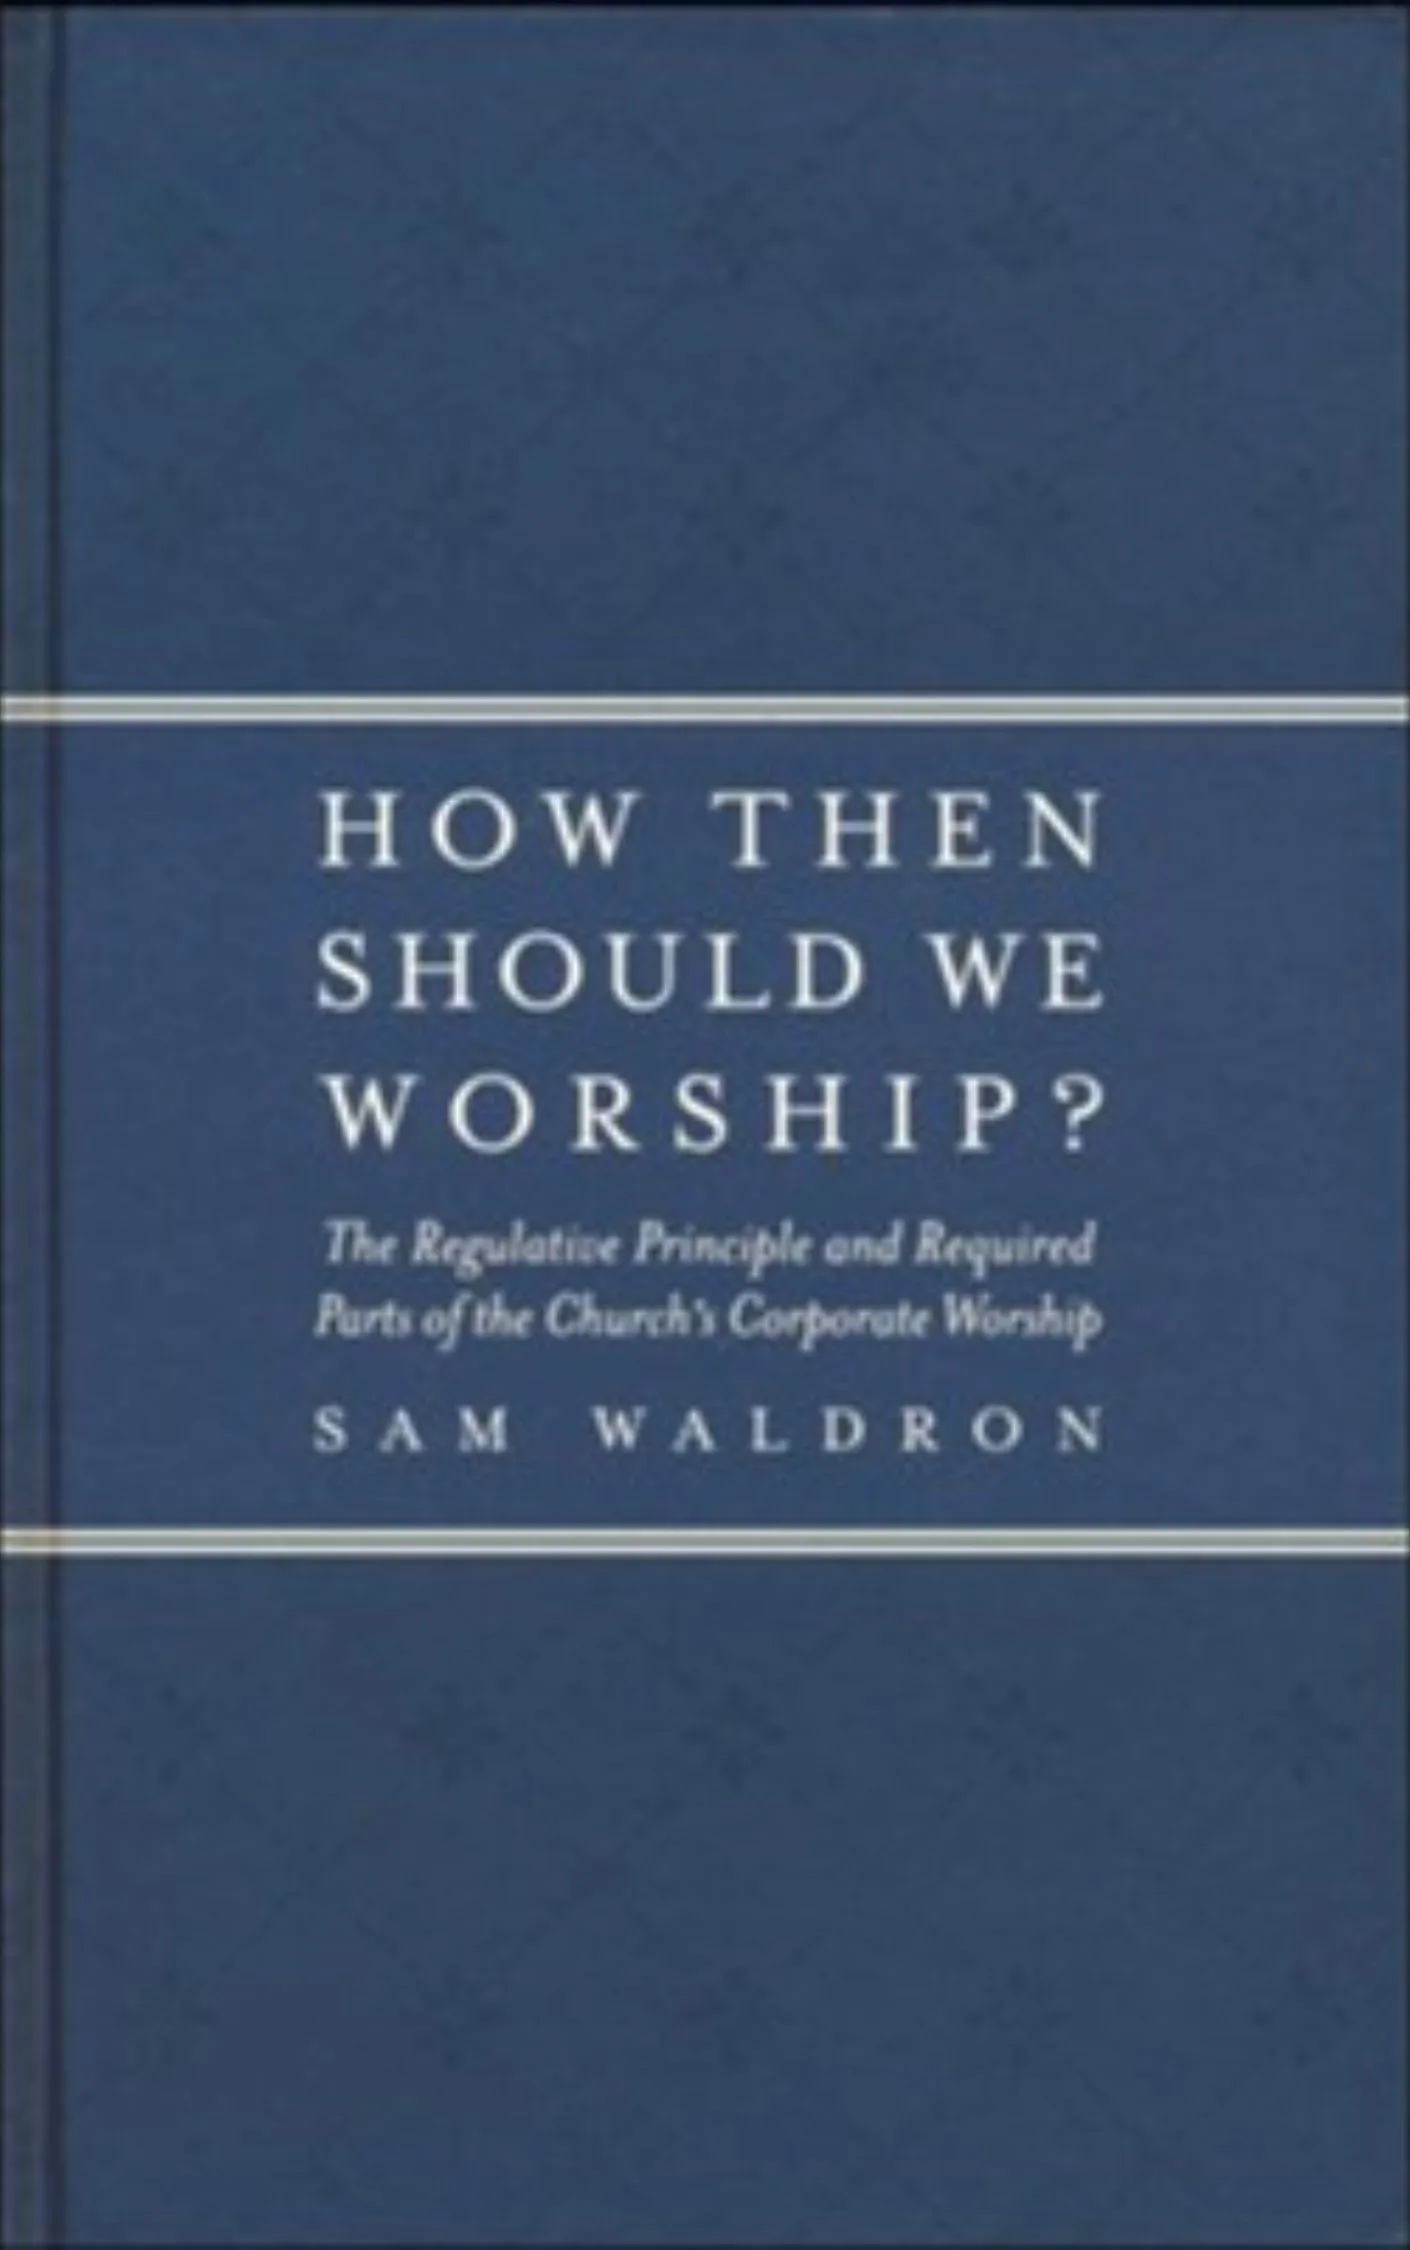 How Then Should We Worship? by Sam Waldron